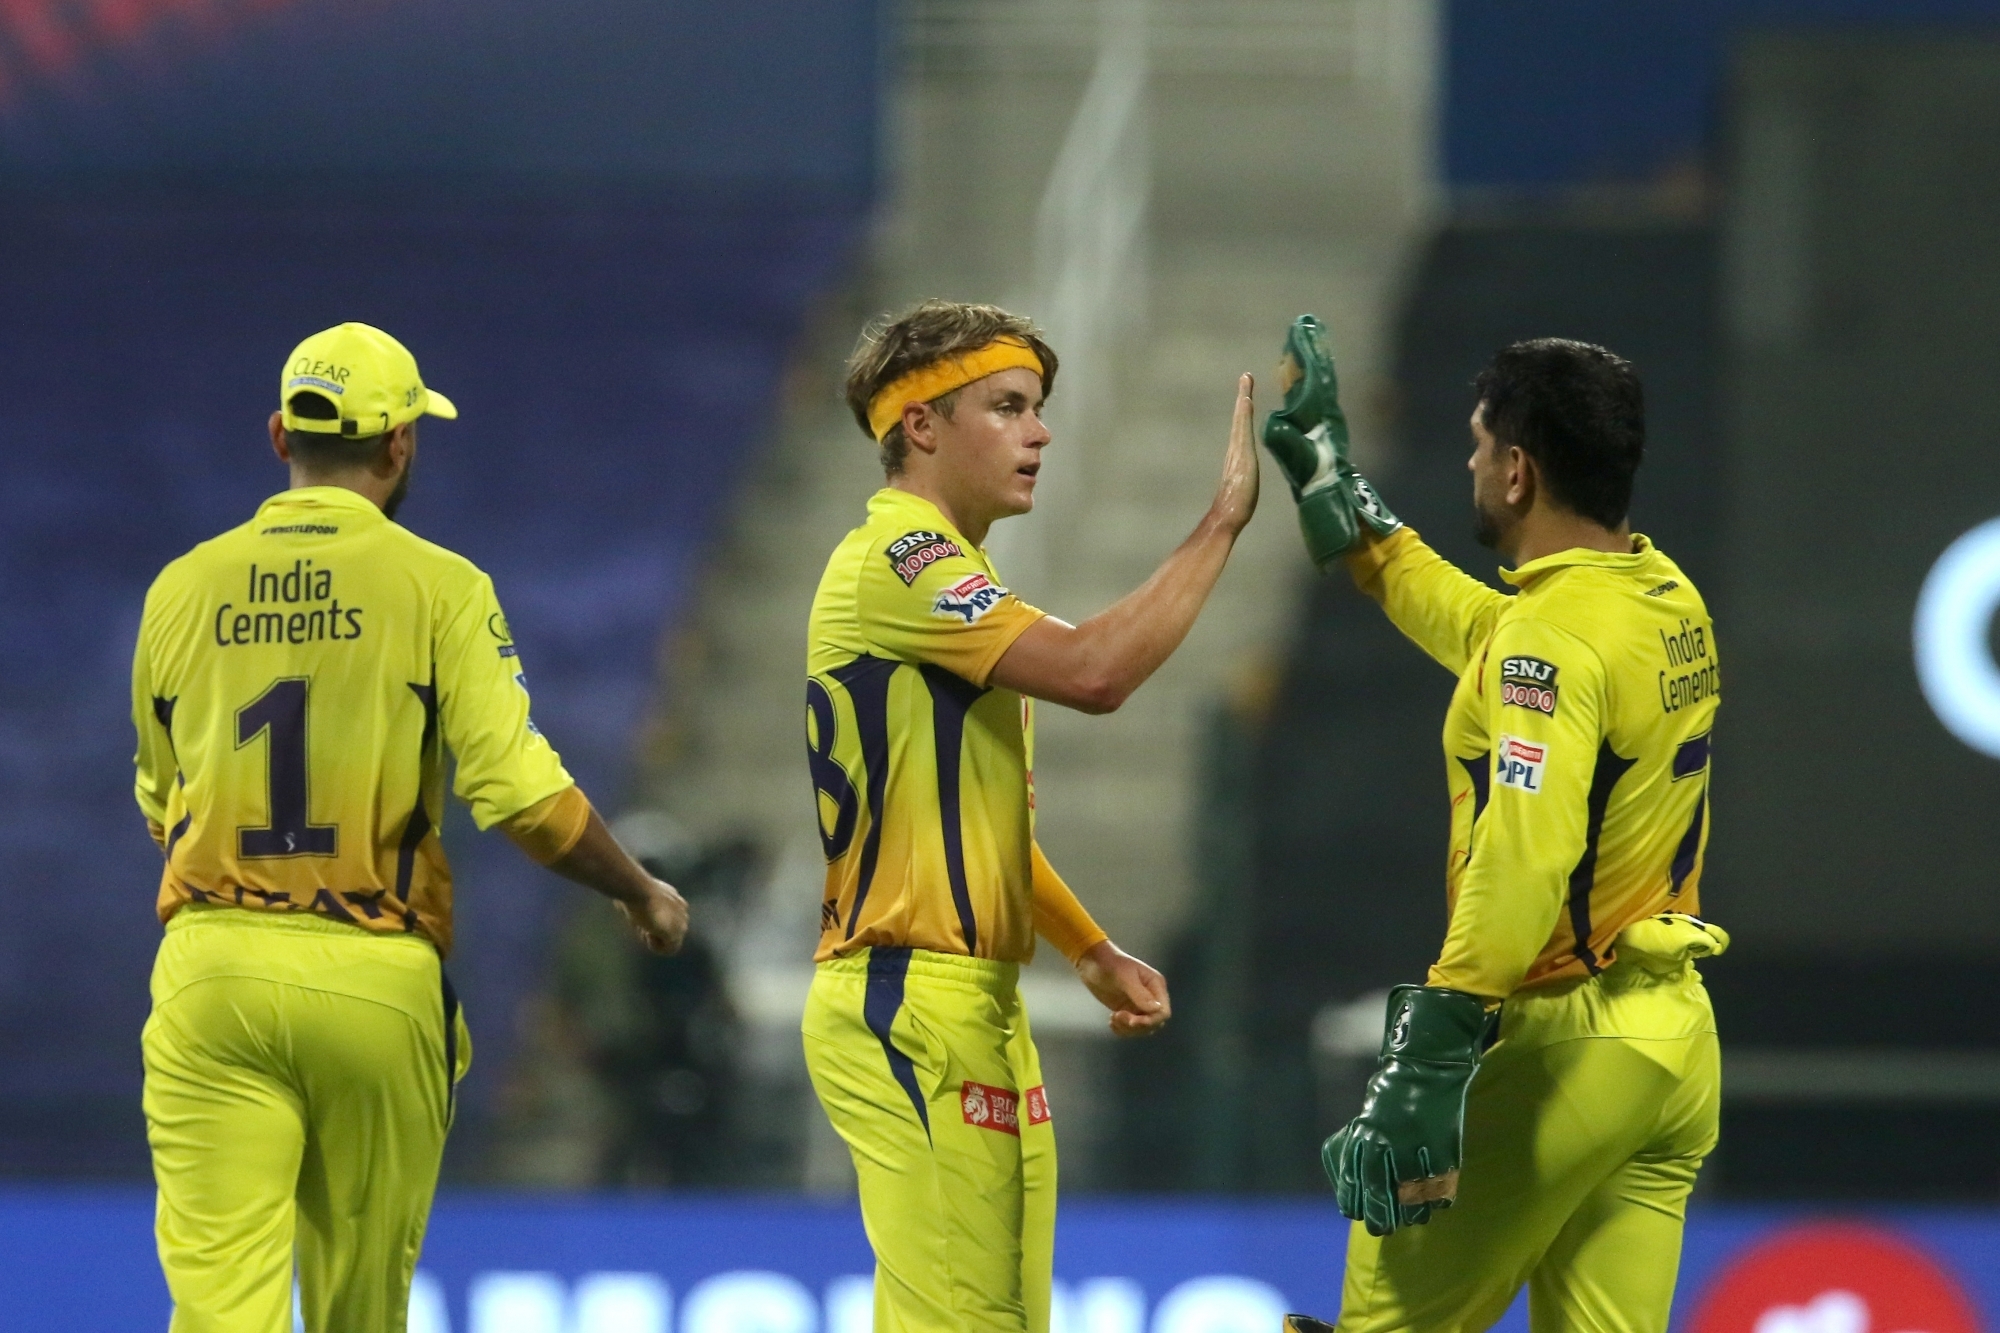 Sam Curran has been the find of IPL 2020 for CSK | BCCI/IPL